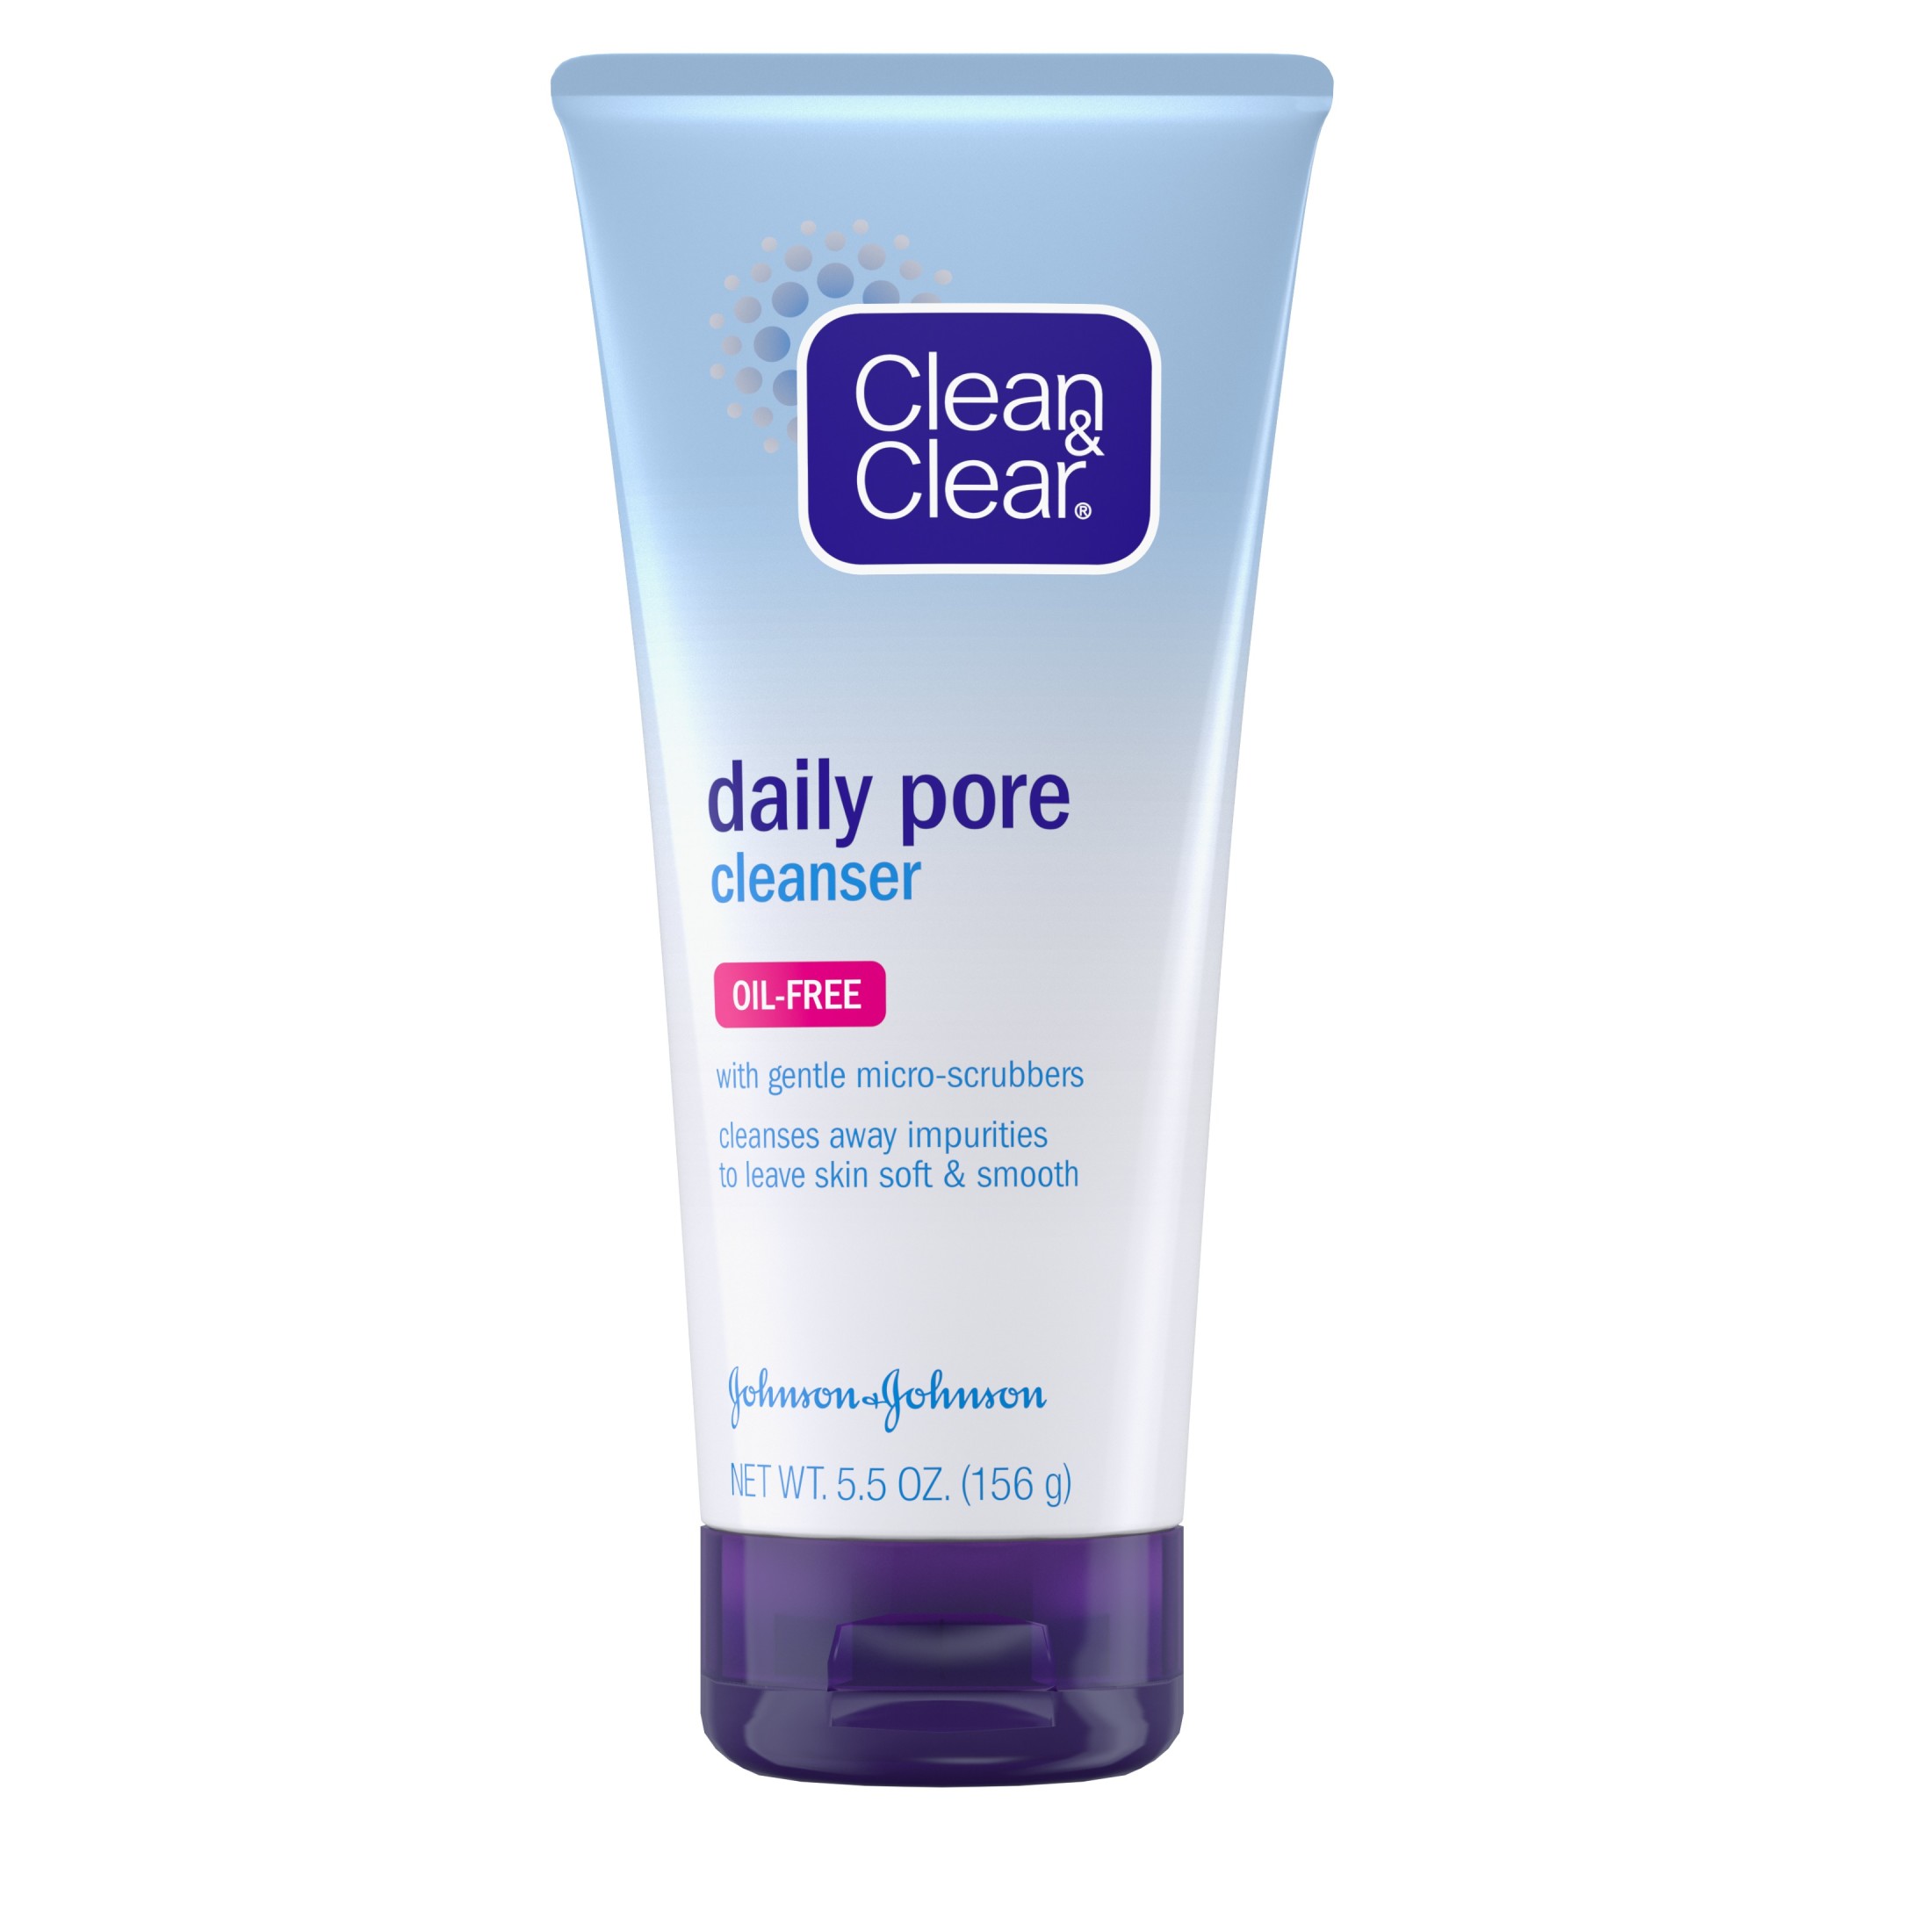 Clean & Clear Daily Pore Face Cleanser for Acne-Prone Skin, 5.5 oz. - image 1 of 13